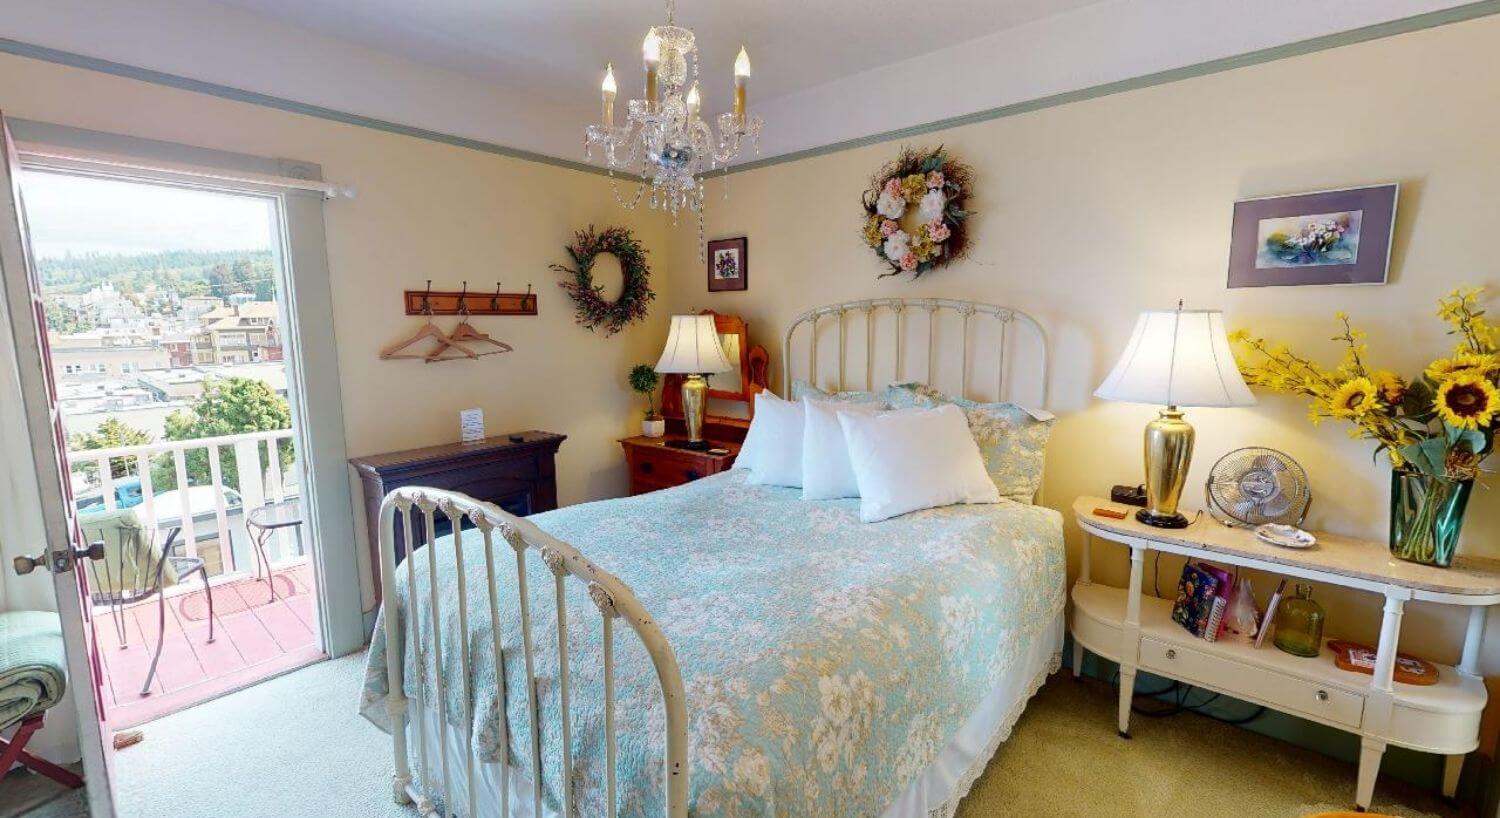 Bedroom ith white iron bed frame, decorative wreaths and chandelier